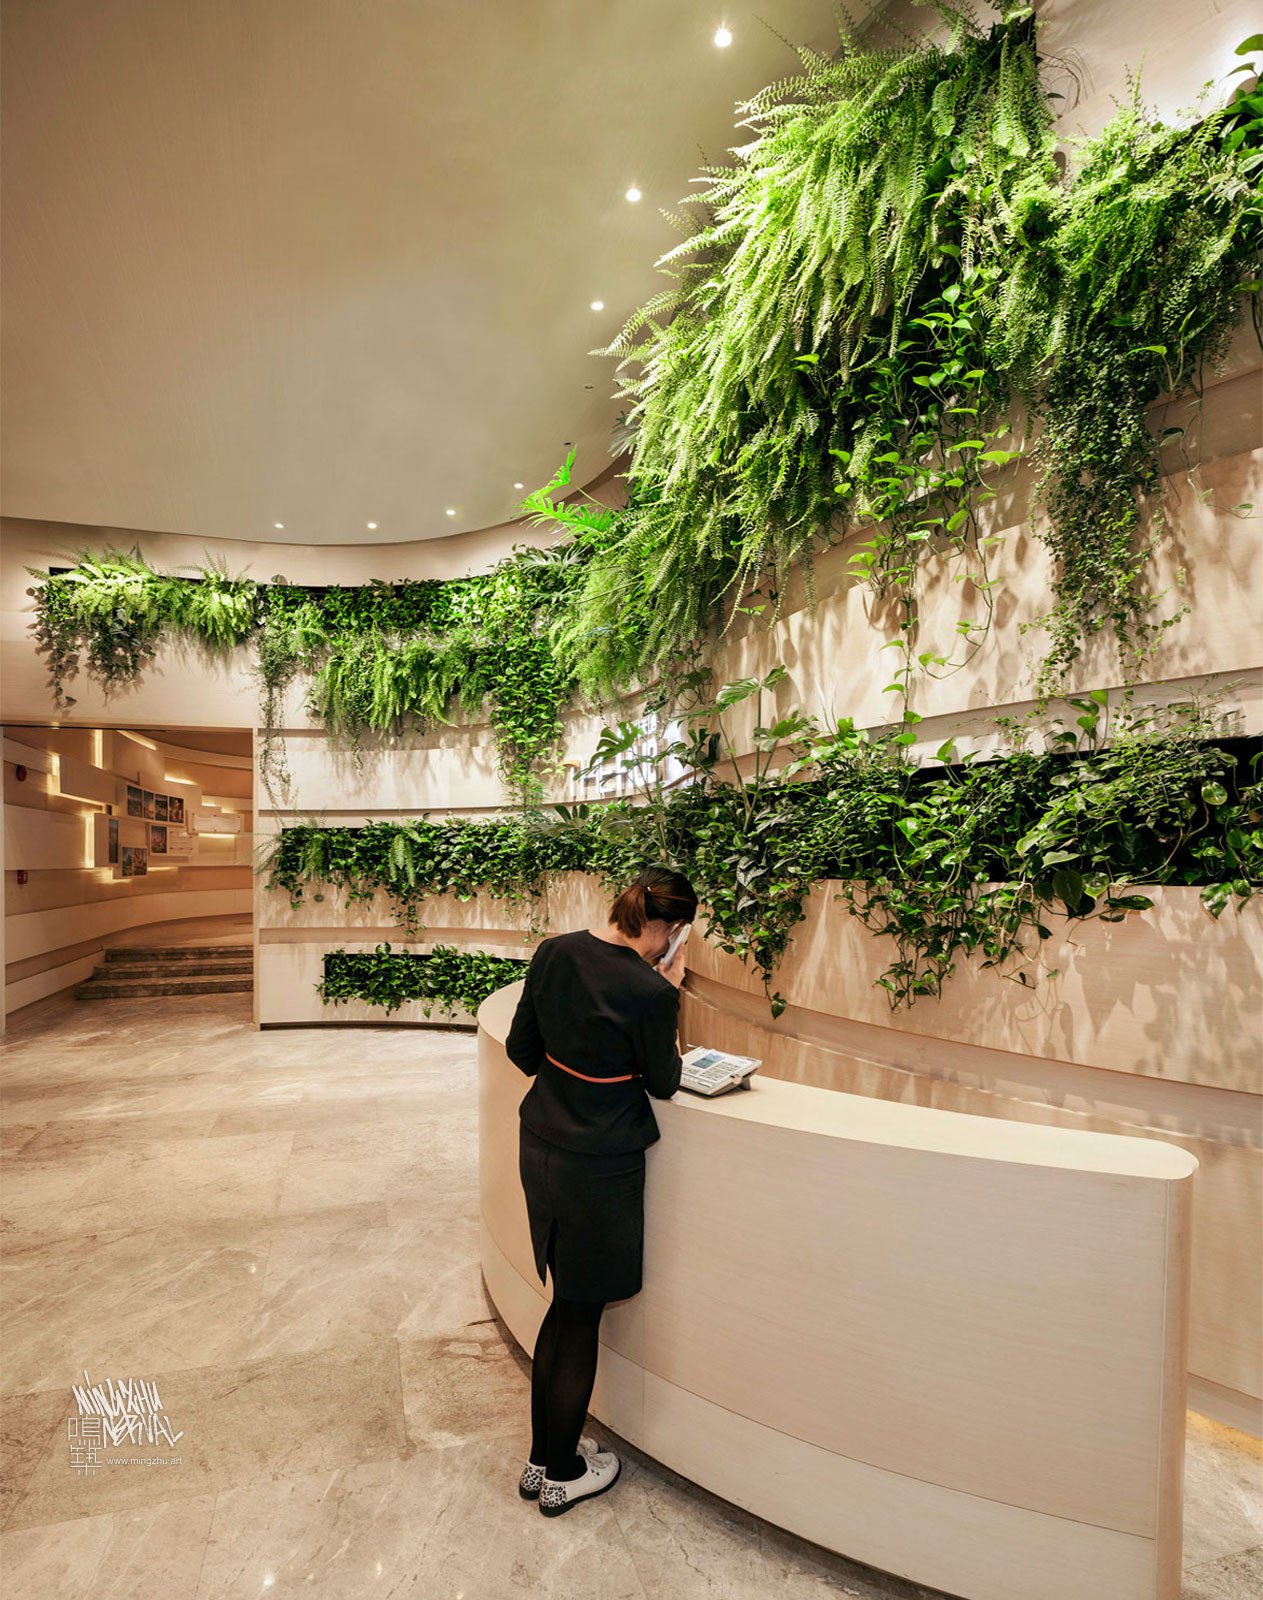 Mingzhu Nerval vertical living wall experts created the green living wall garden design at the Shui-On Showroom, The Hub in Shanghai, 2012